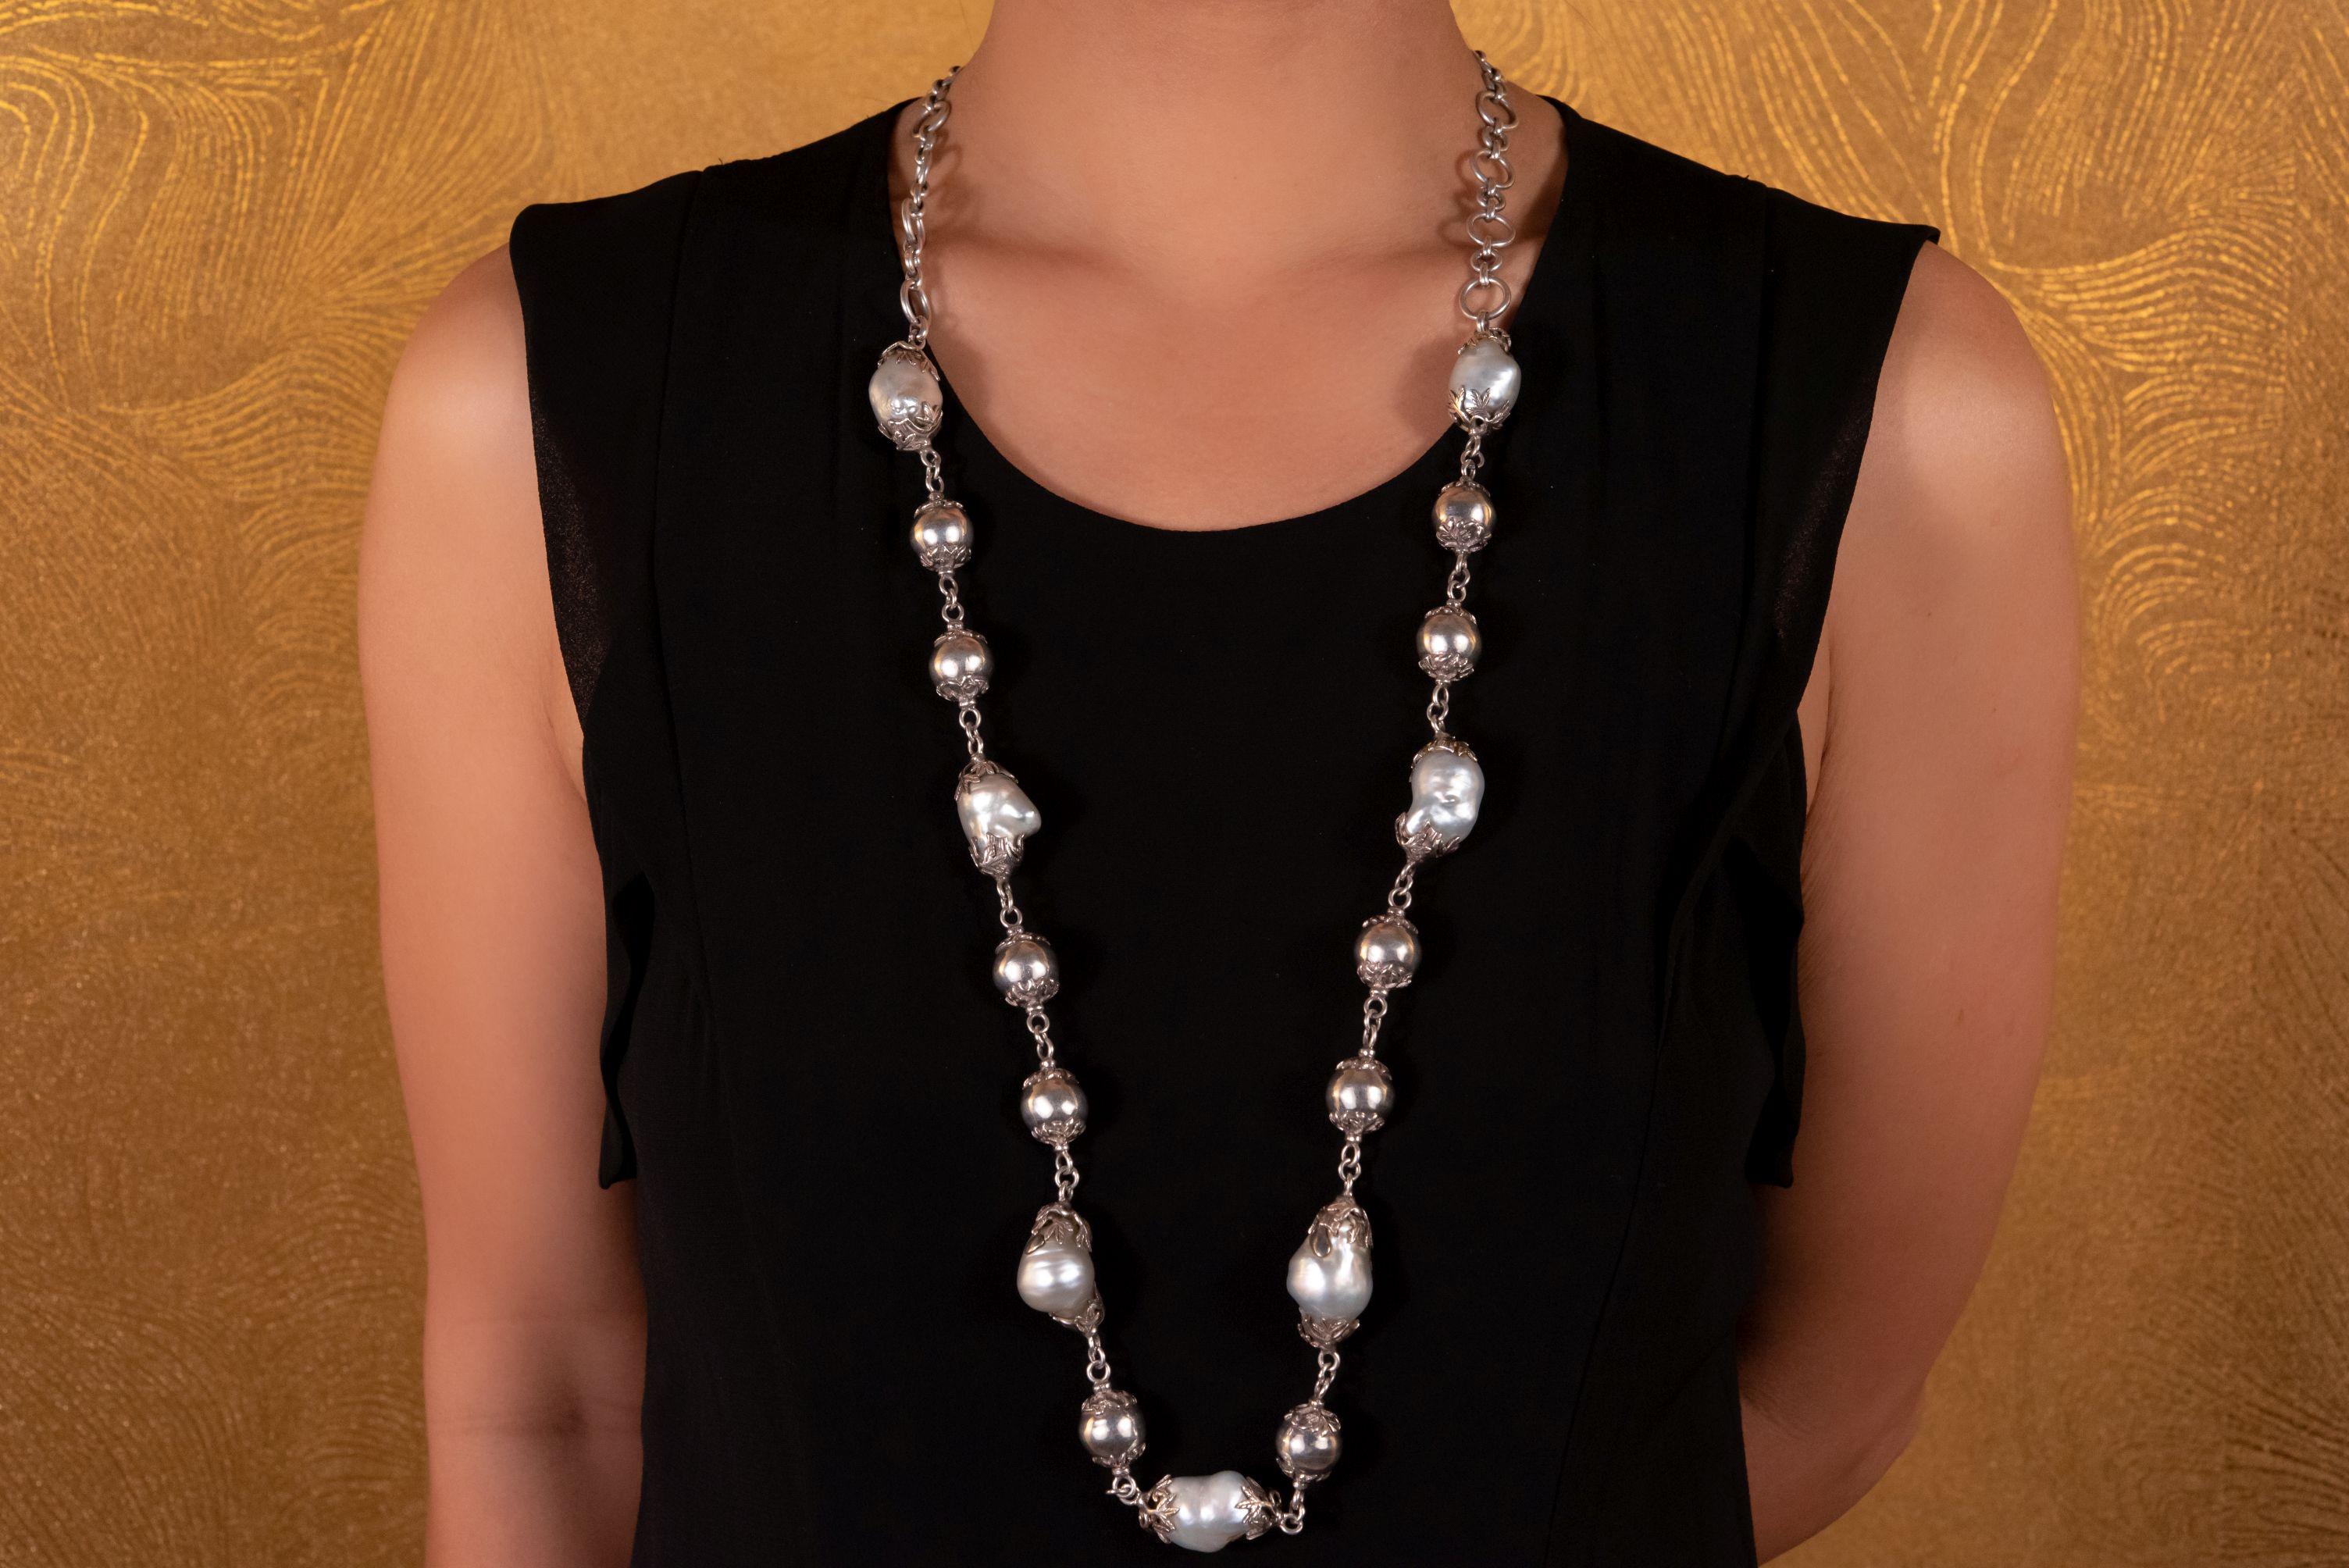 Featuring stunning South Sea baroque silver pearls interspersed with sterling silver beads, this gorgeous necklace delivers unmatched elegance day or night. Set on a generous sterling silver chain, wear it long or wrap it twice for a statement that